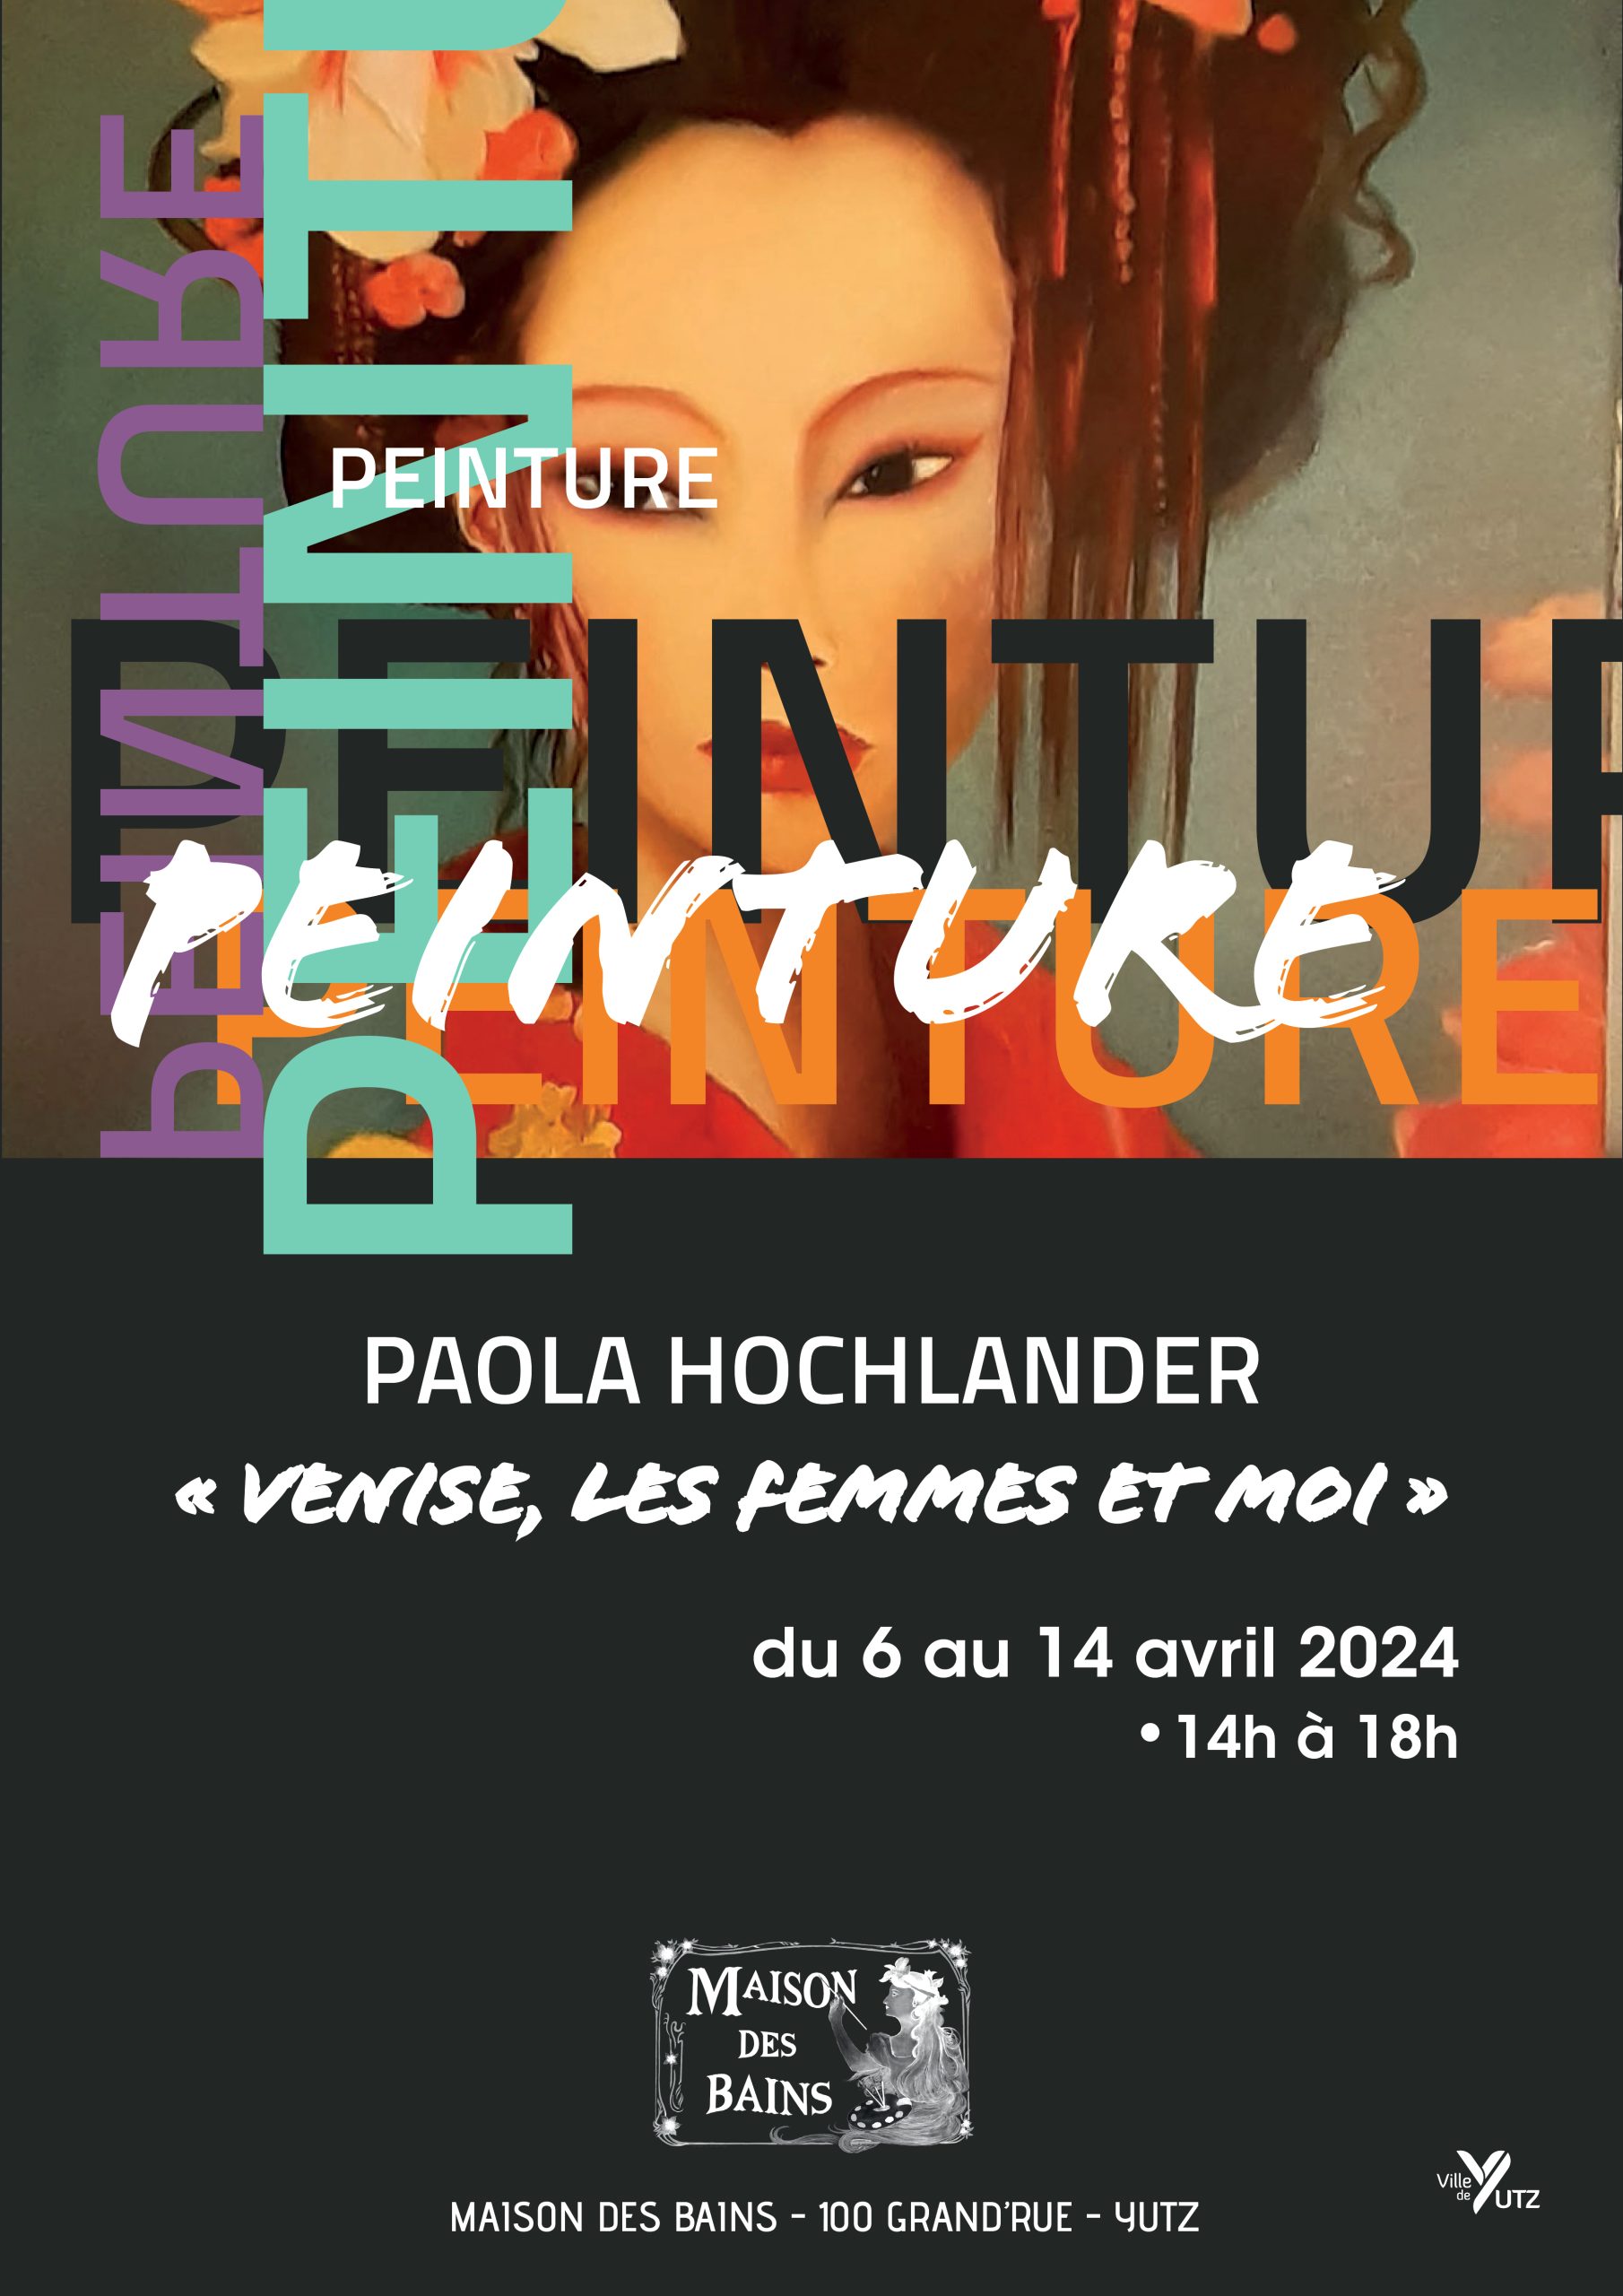 Exhibition of paintings by Paola Hochlander